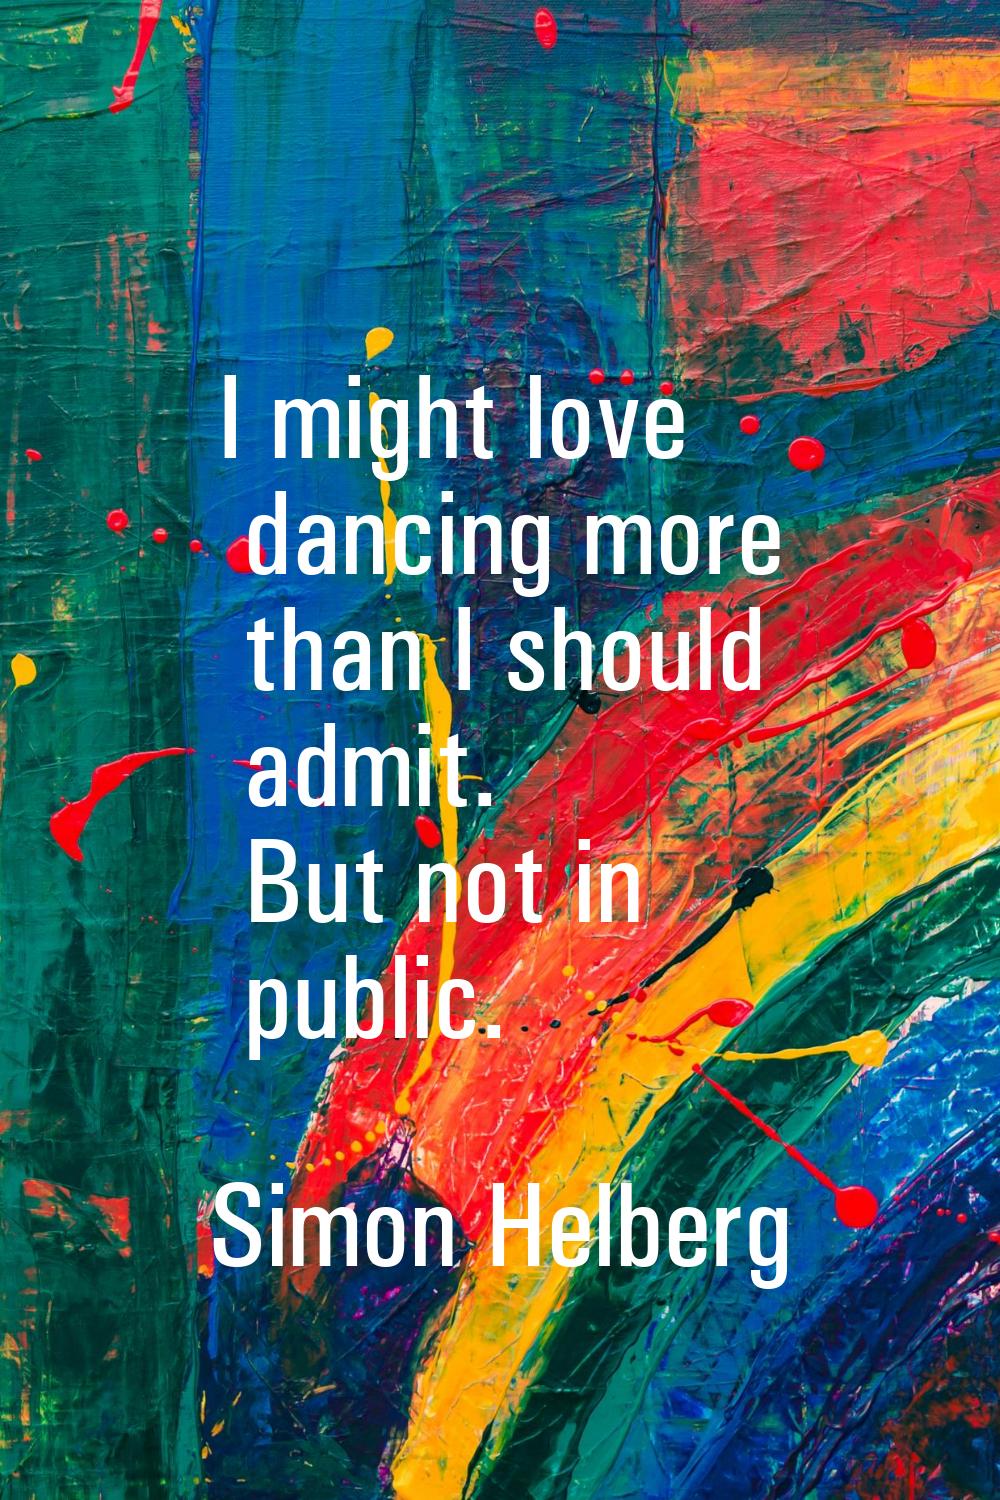 I might love dancing more than I should admit. But not in public.